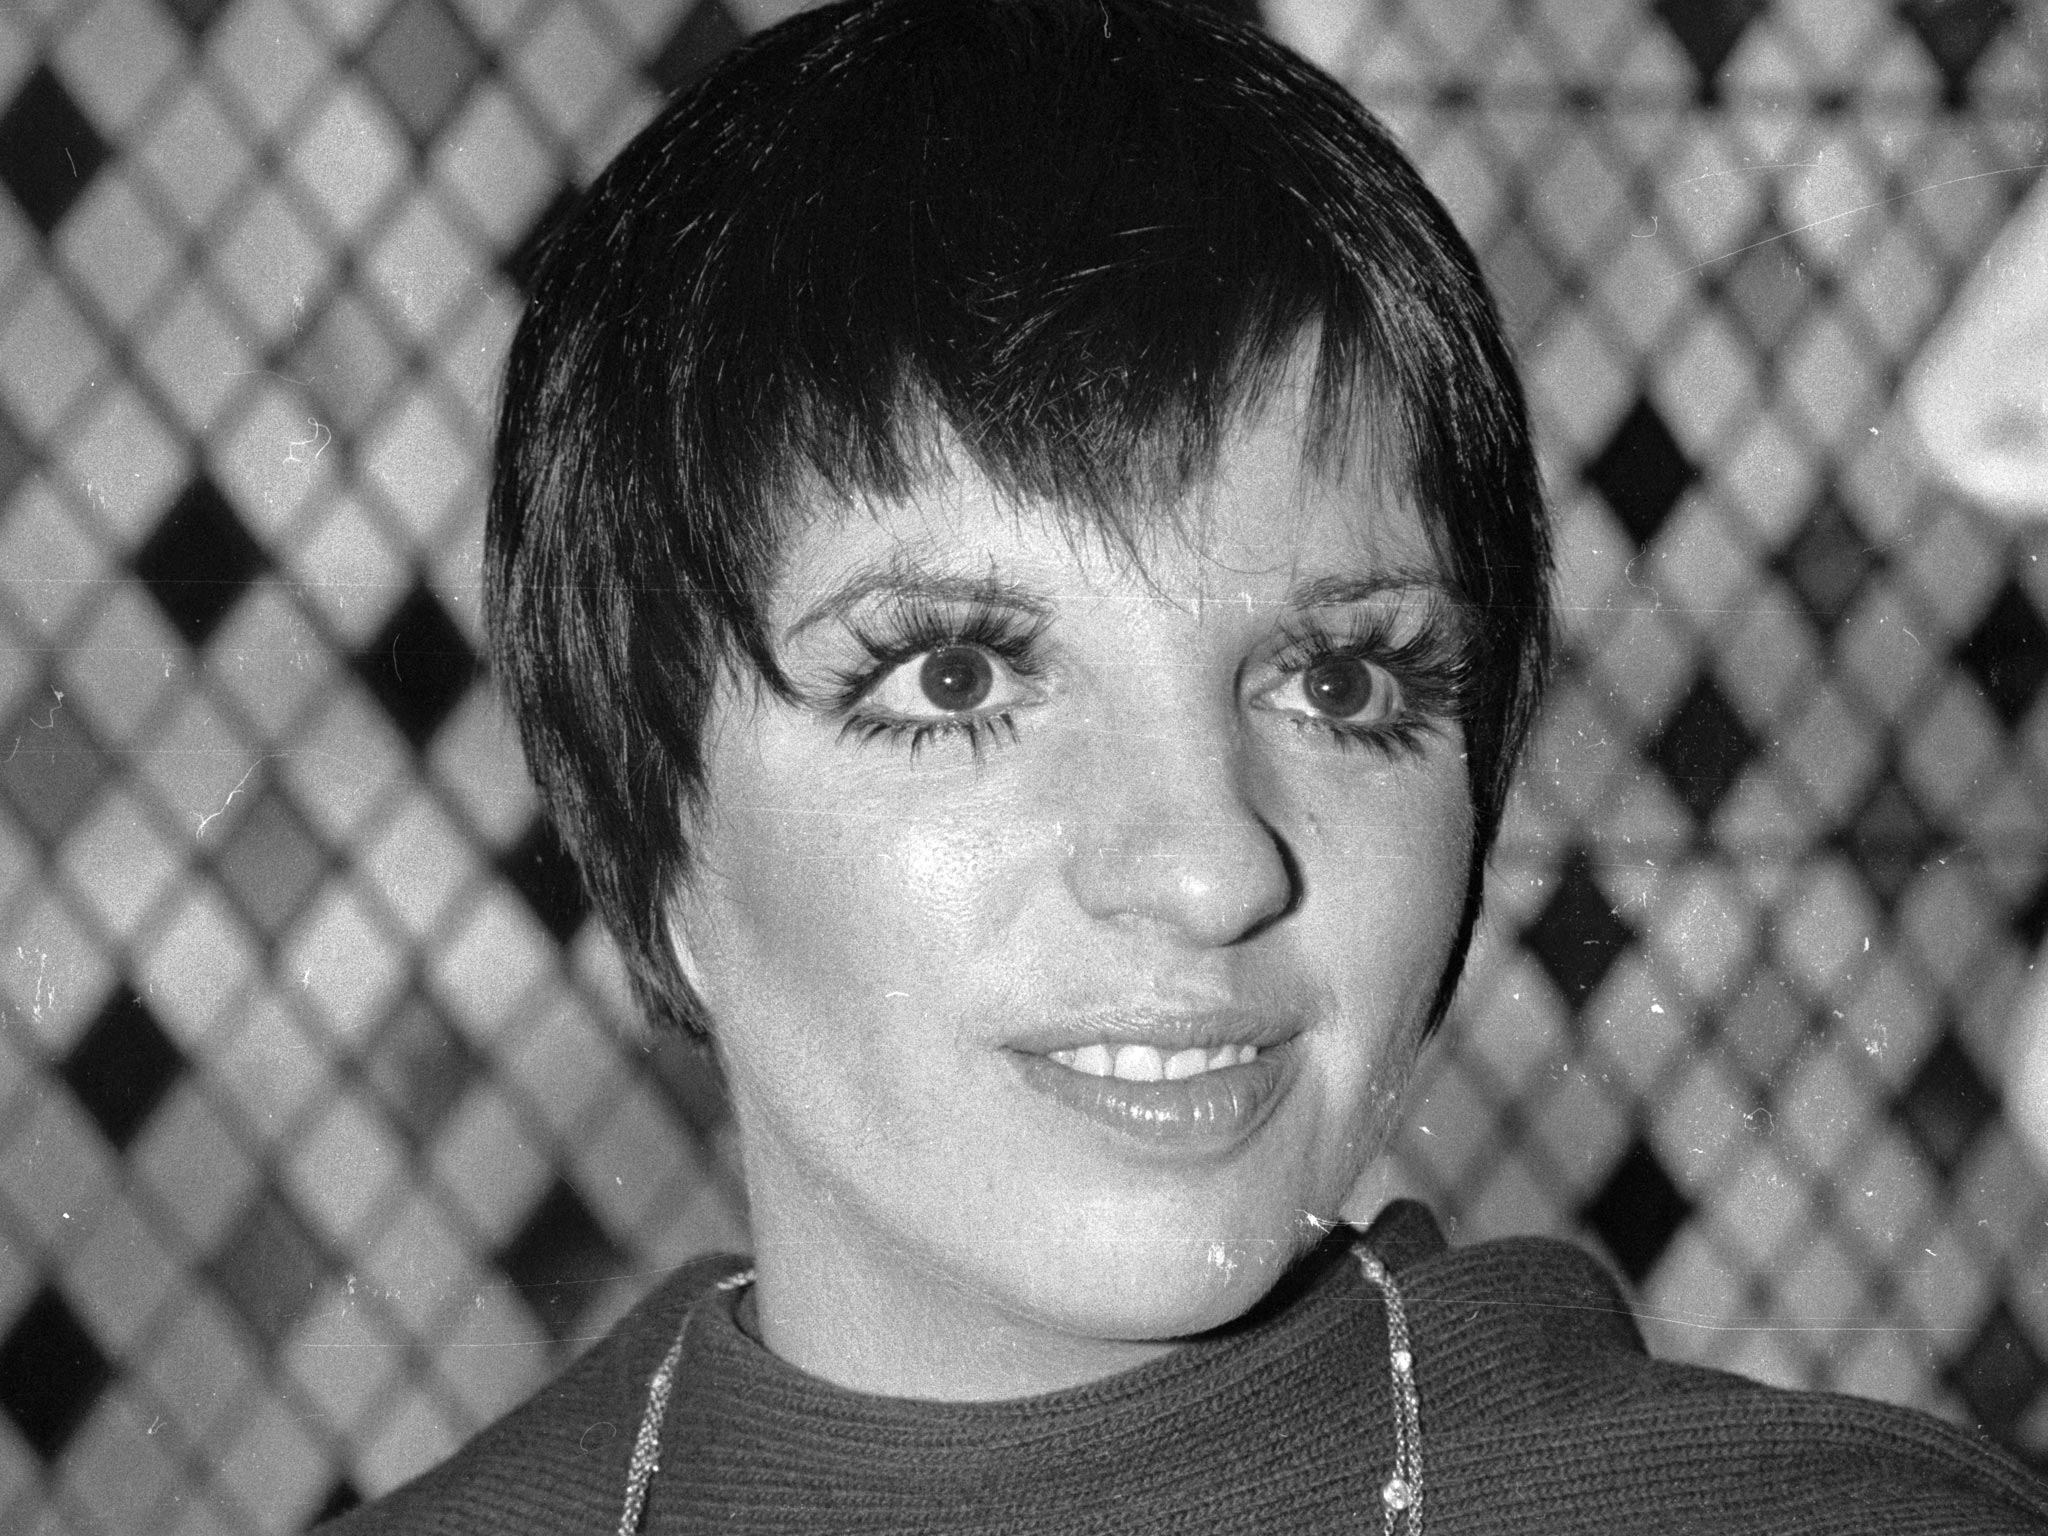 Actress Liza Minnelli who took Quaaludes before dancing at Studio 54